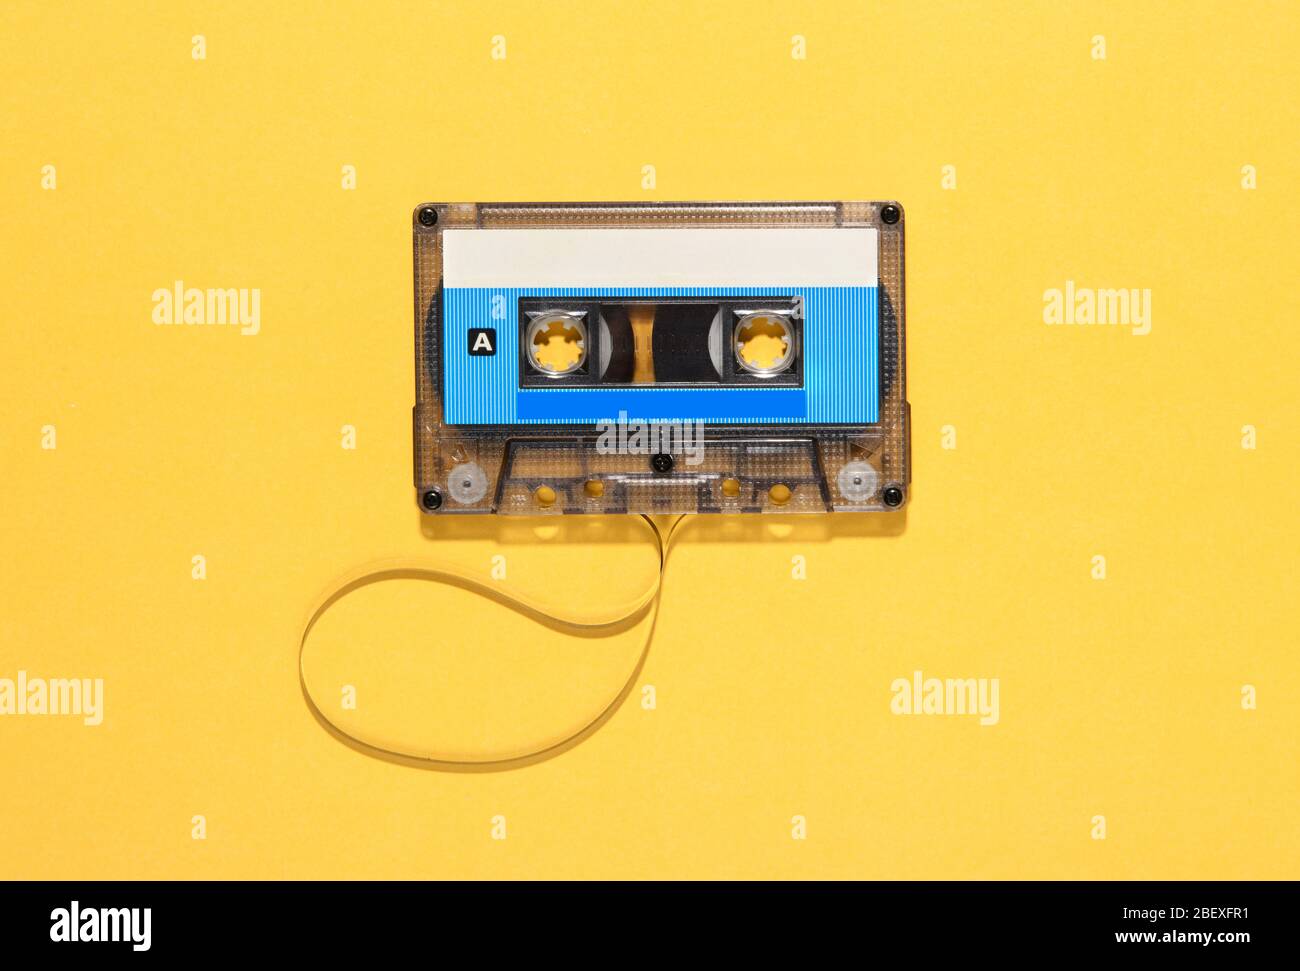 Vintage audio cassette with unwound tape spool over yellow with copy space viewed as a flat lay still life Stock Photo